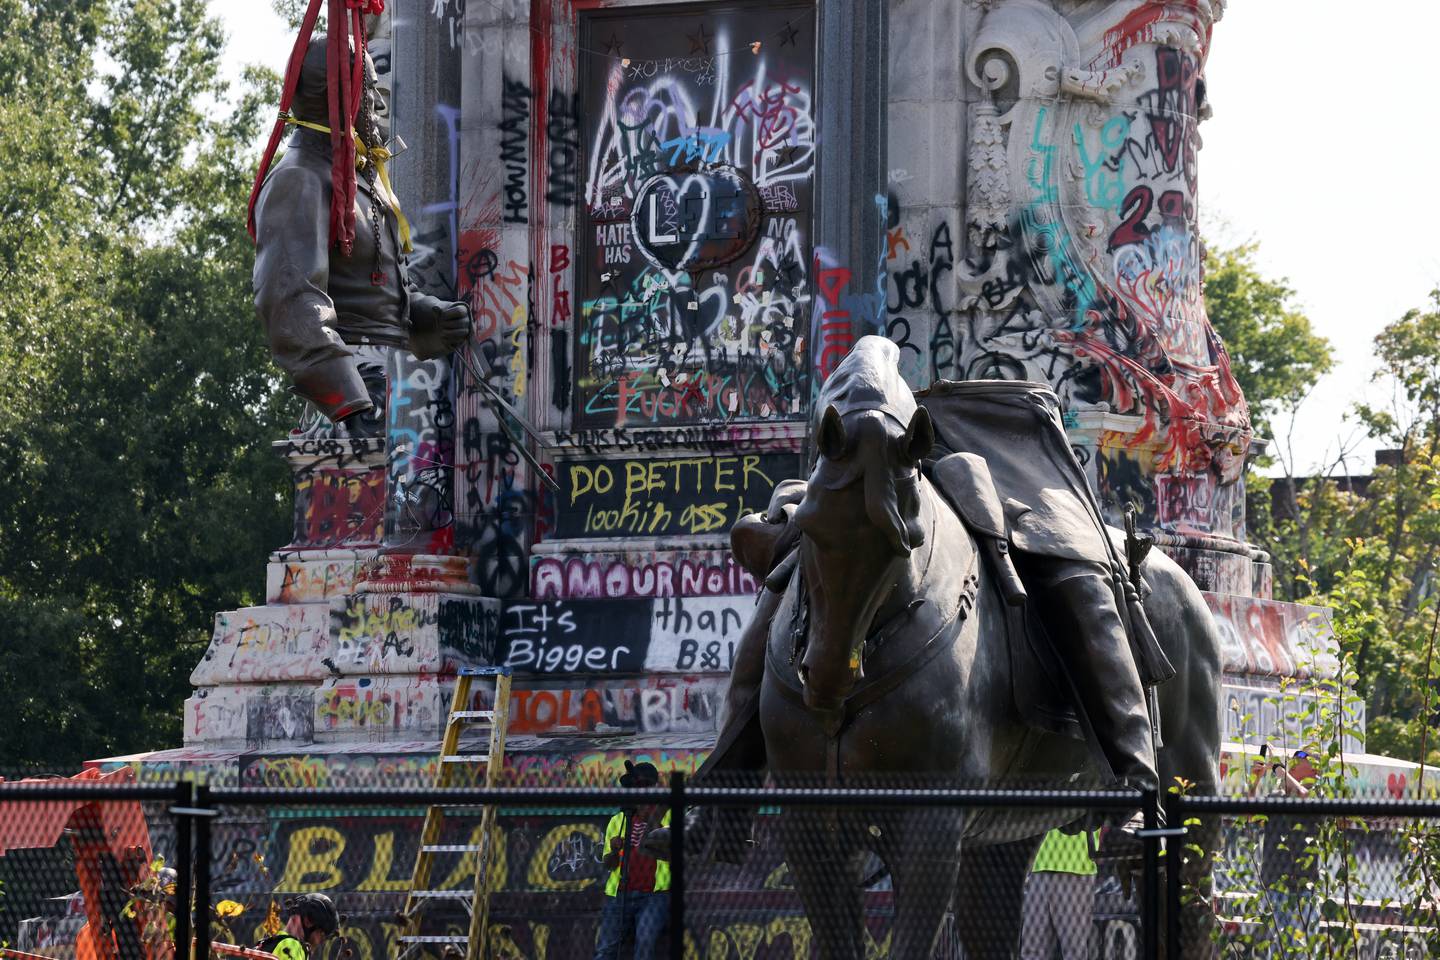 The pedestal has been covered by constantly evolving, colourful graffiti. Reuters